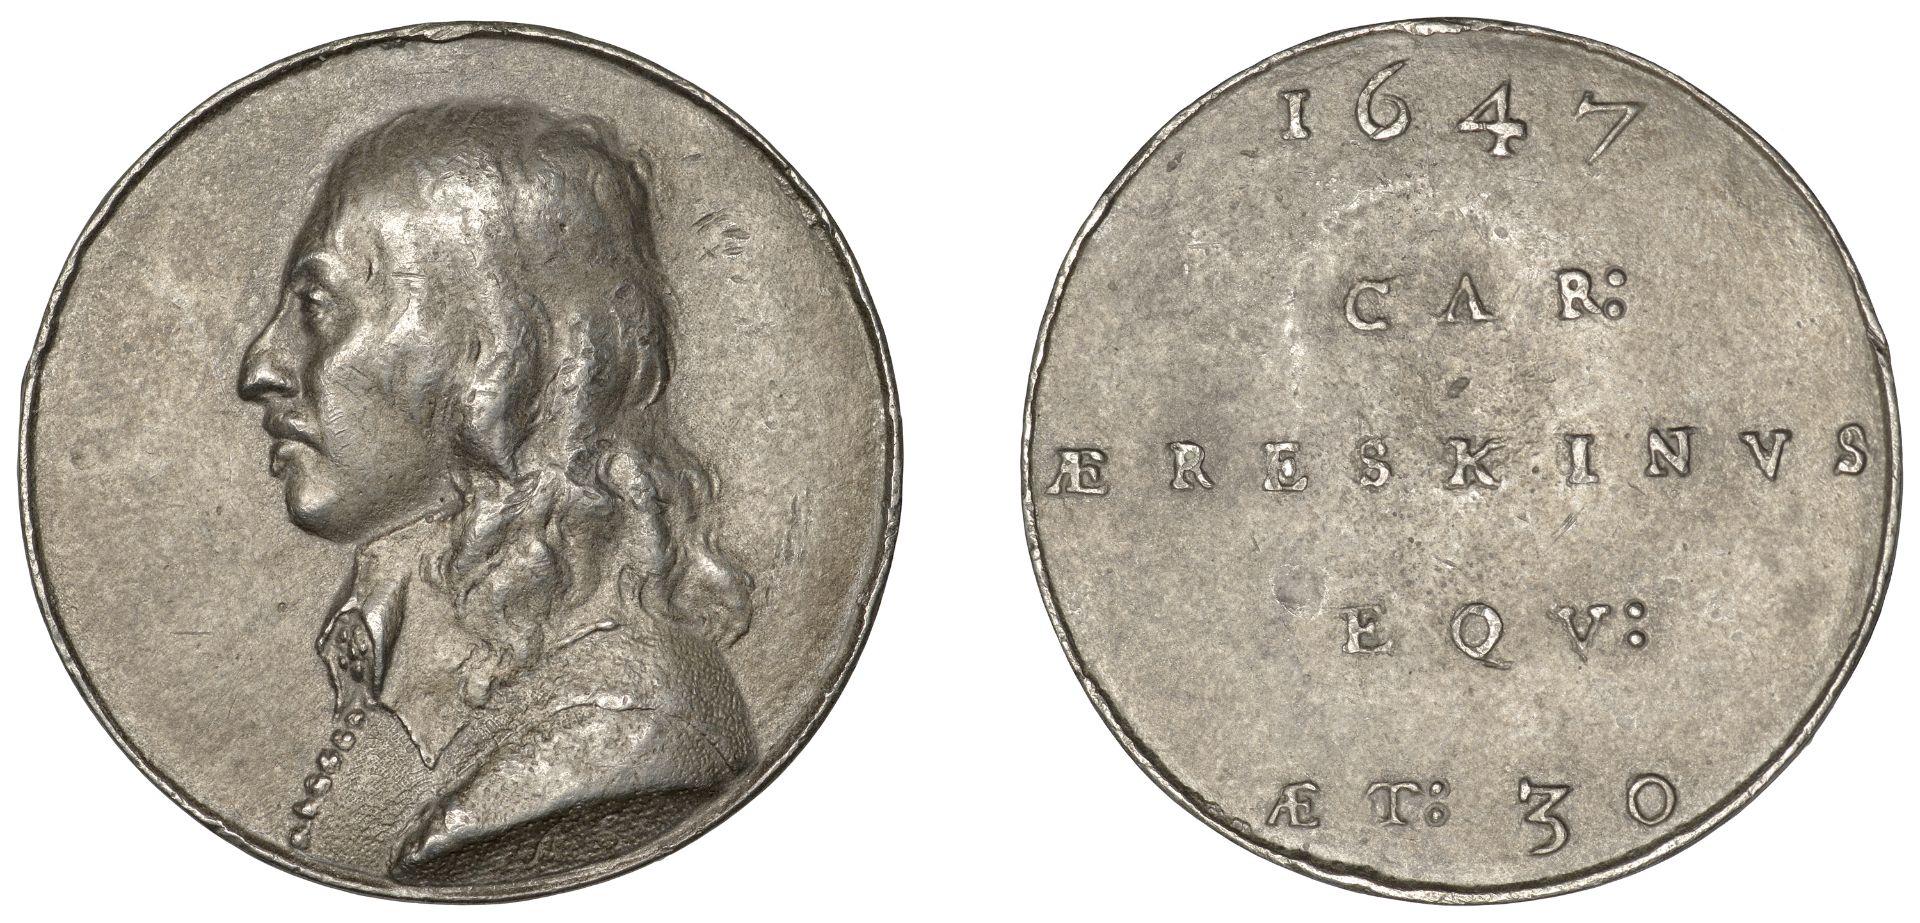 Sir Charles Erskine of Alva, 1647, a pewter medal by A. Simon, bust left, wearing buttoned d...